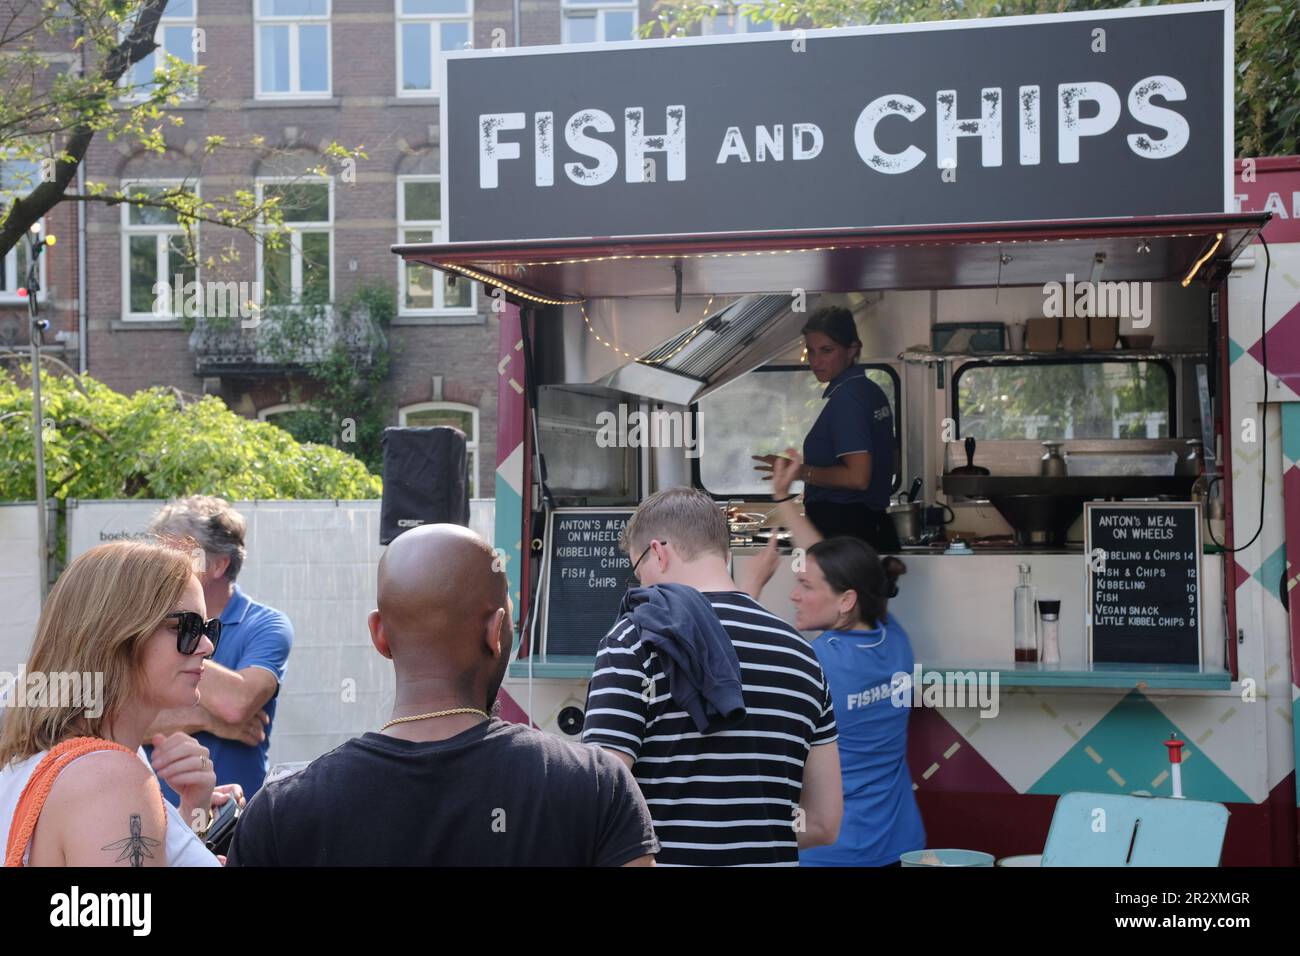 Maastricht, The Netherlands - 05 21 2023: People enjoying themselves at the Trek Foodtruck festival in Maastricht. Stock Photo